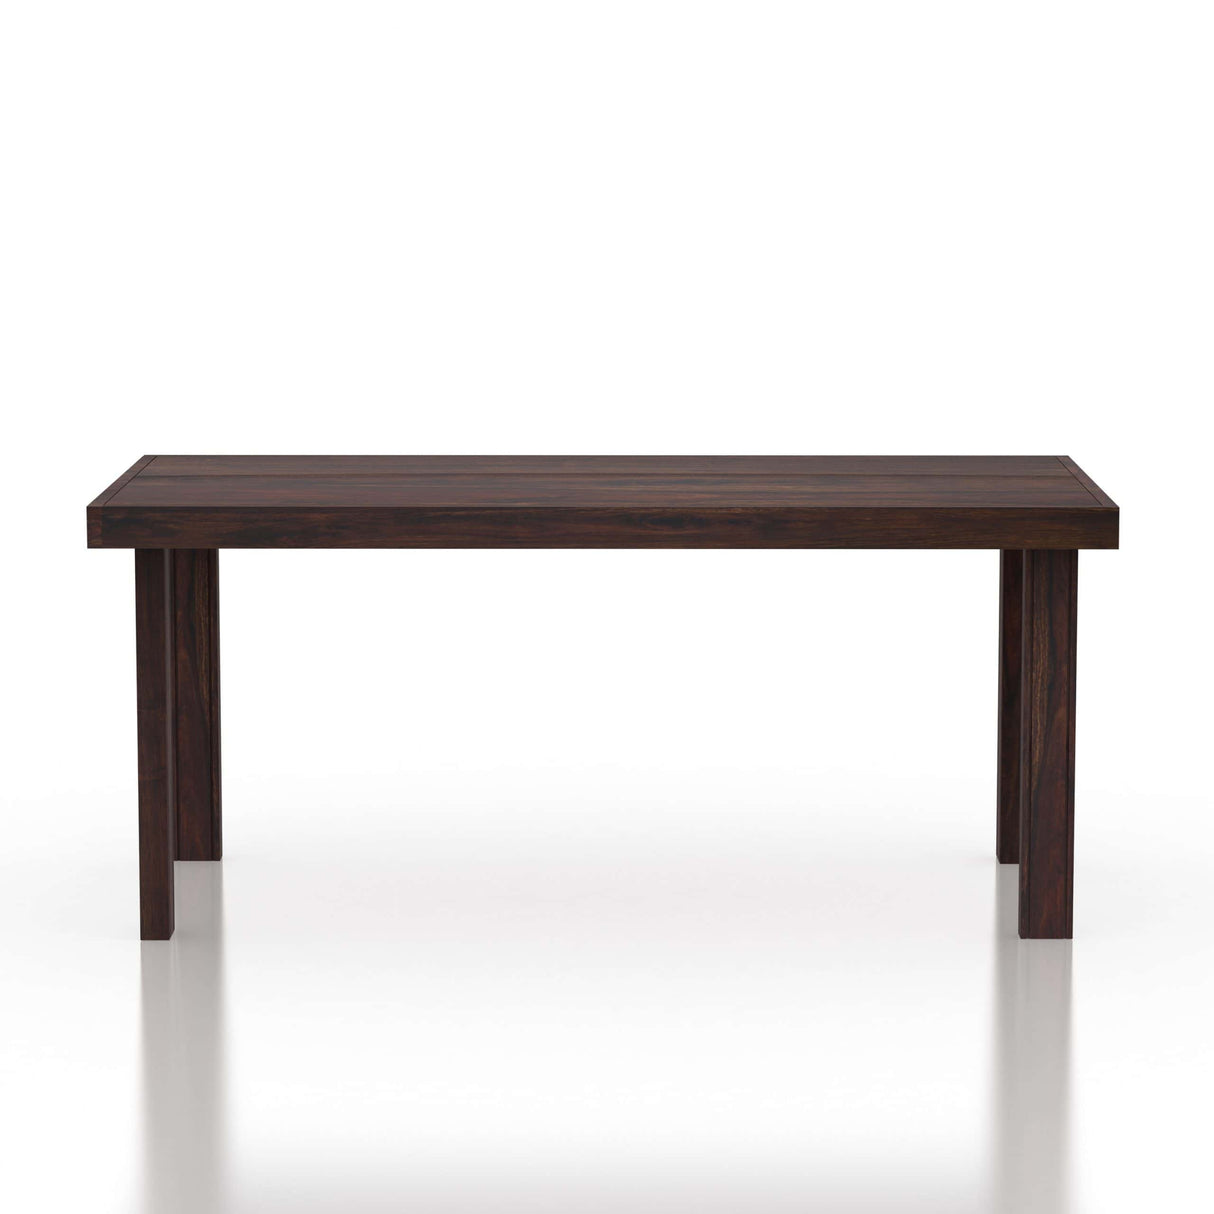 Jaipur Solid Sheesham Wood 6 Seater Dining Table - 1 Year Warranty